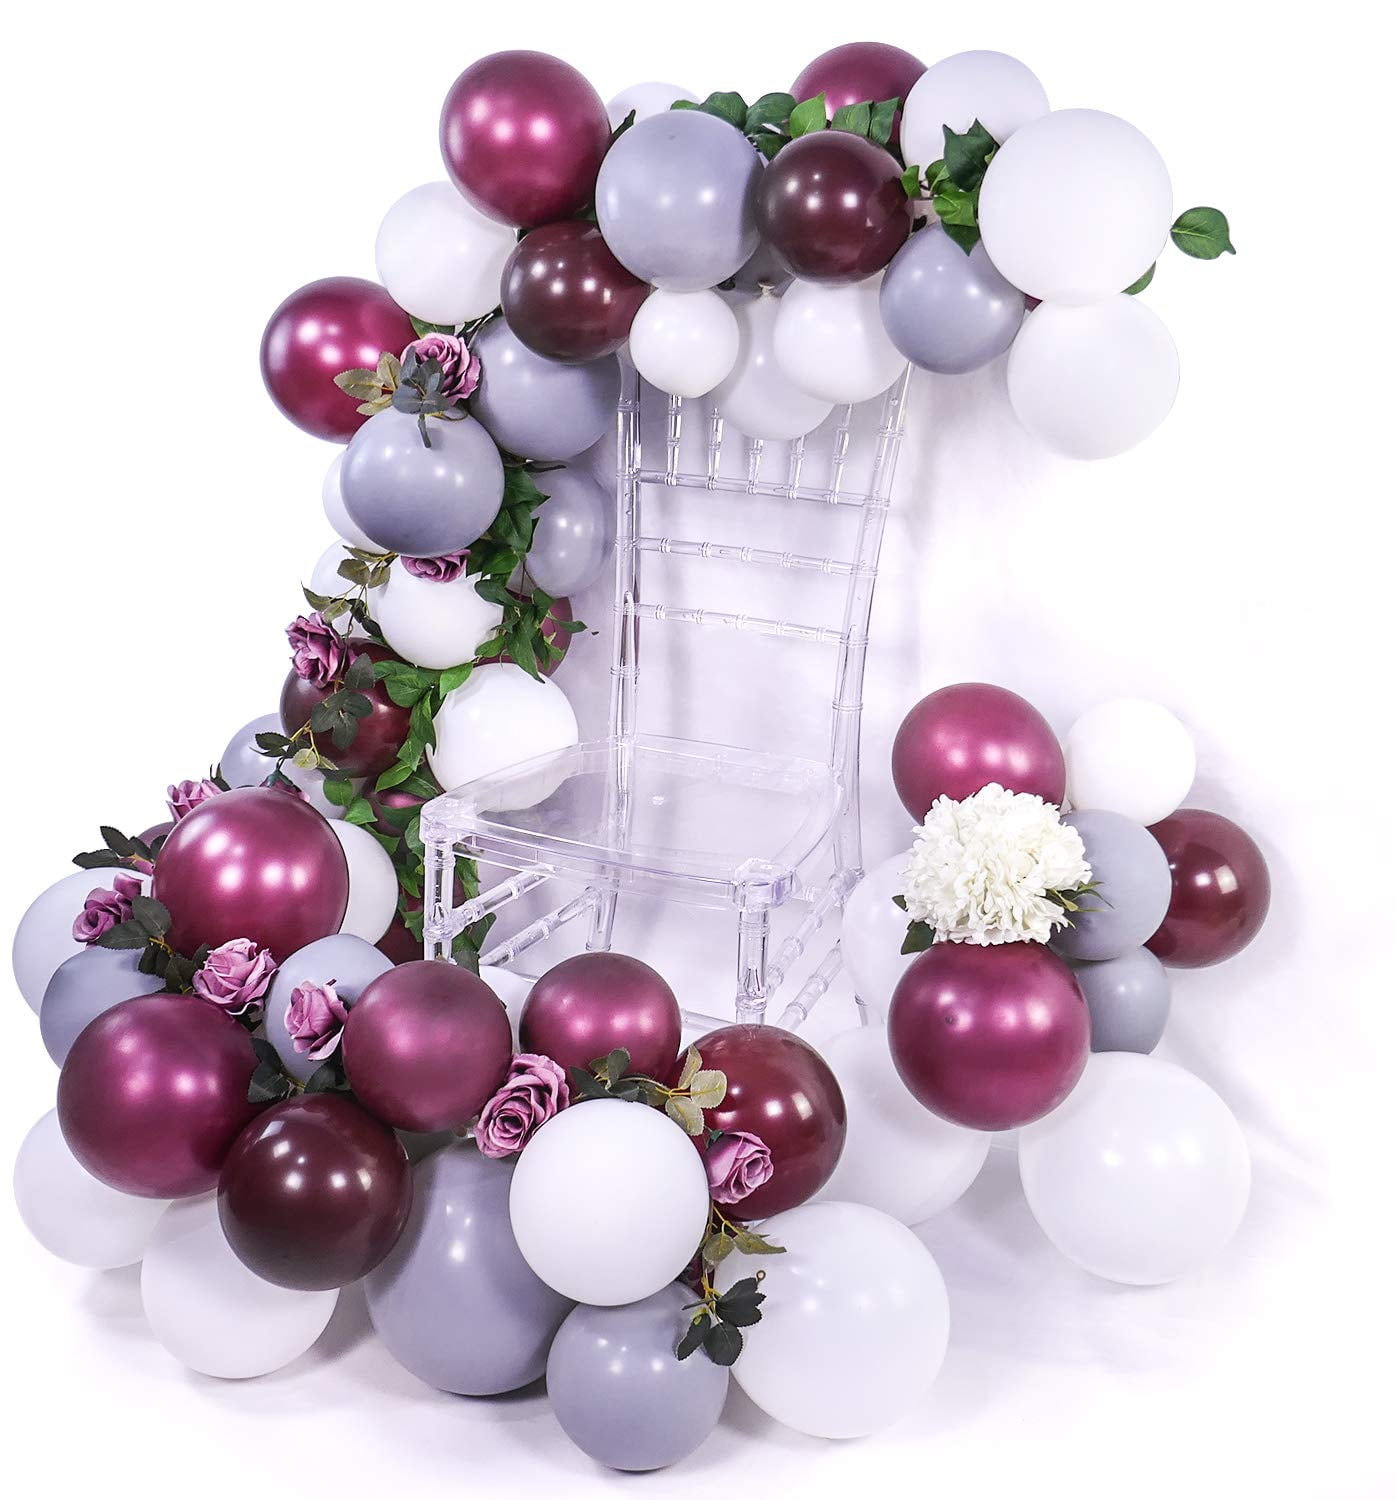 White Balloons, PartyWoo Gray and White Balloons 70 pcs 12 In Gray Balloons